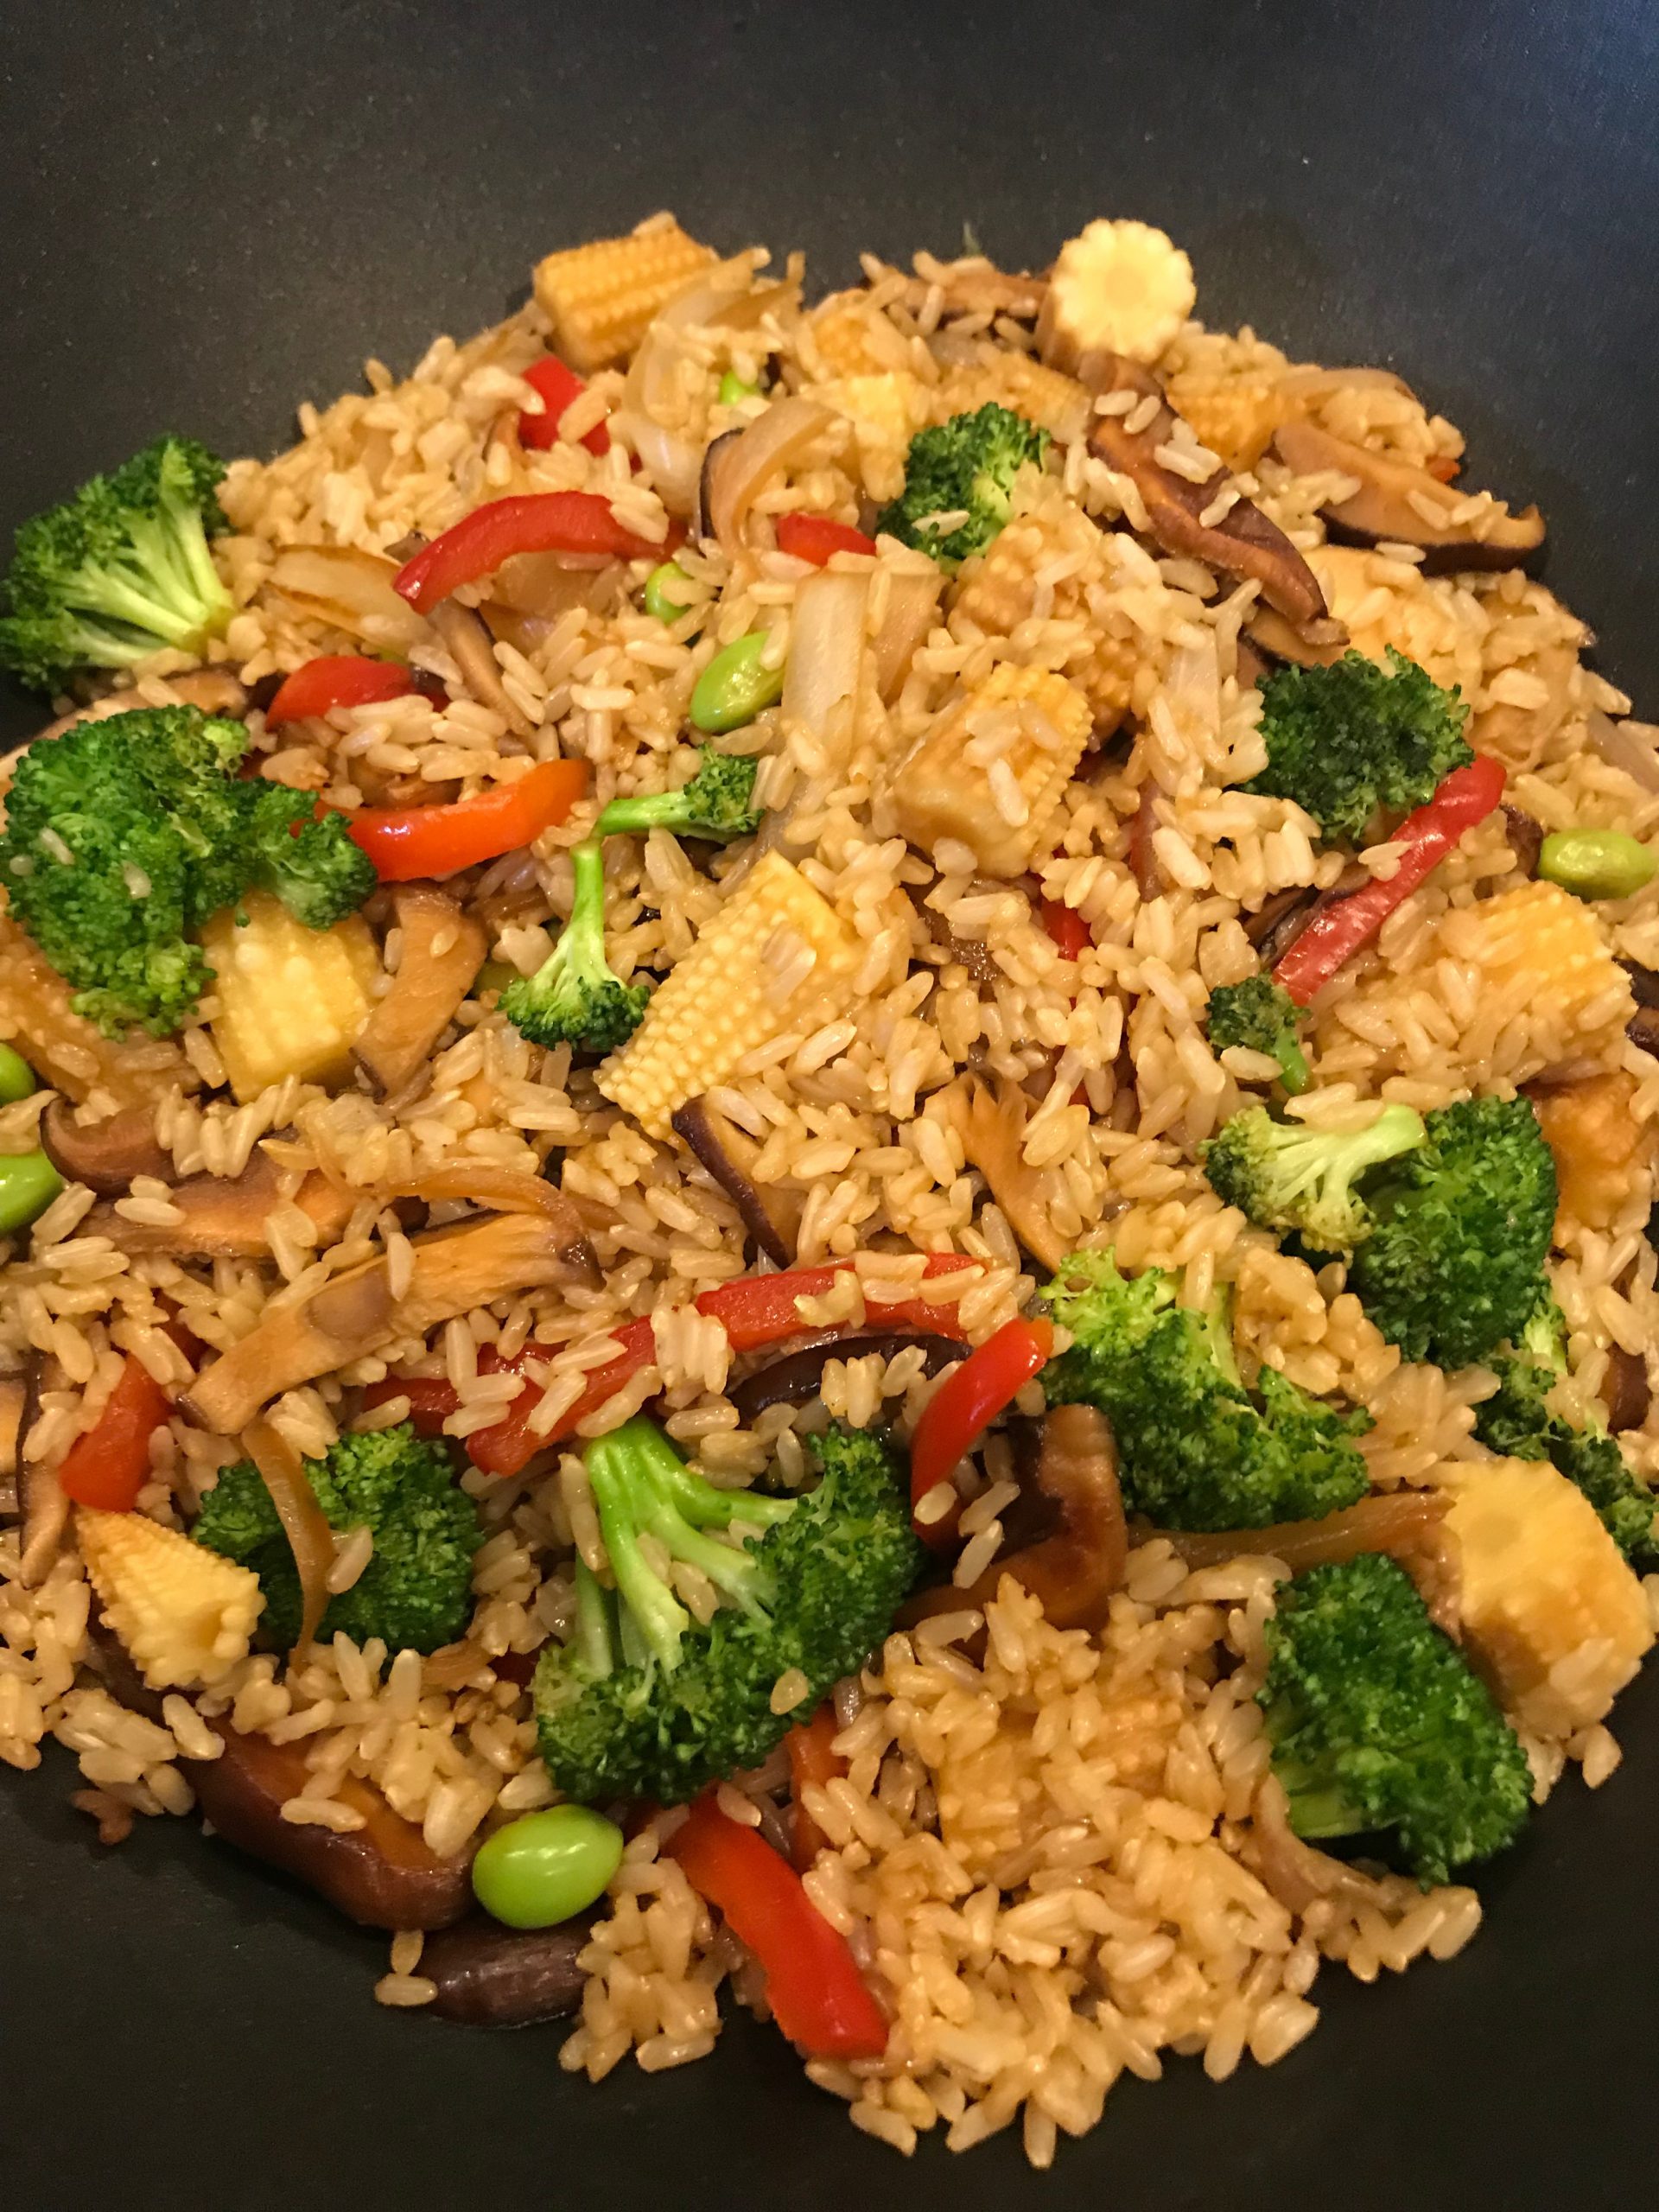 A wok of vegetable fried rice with broccoli, mushrooms, and baby corn